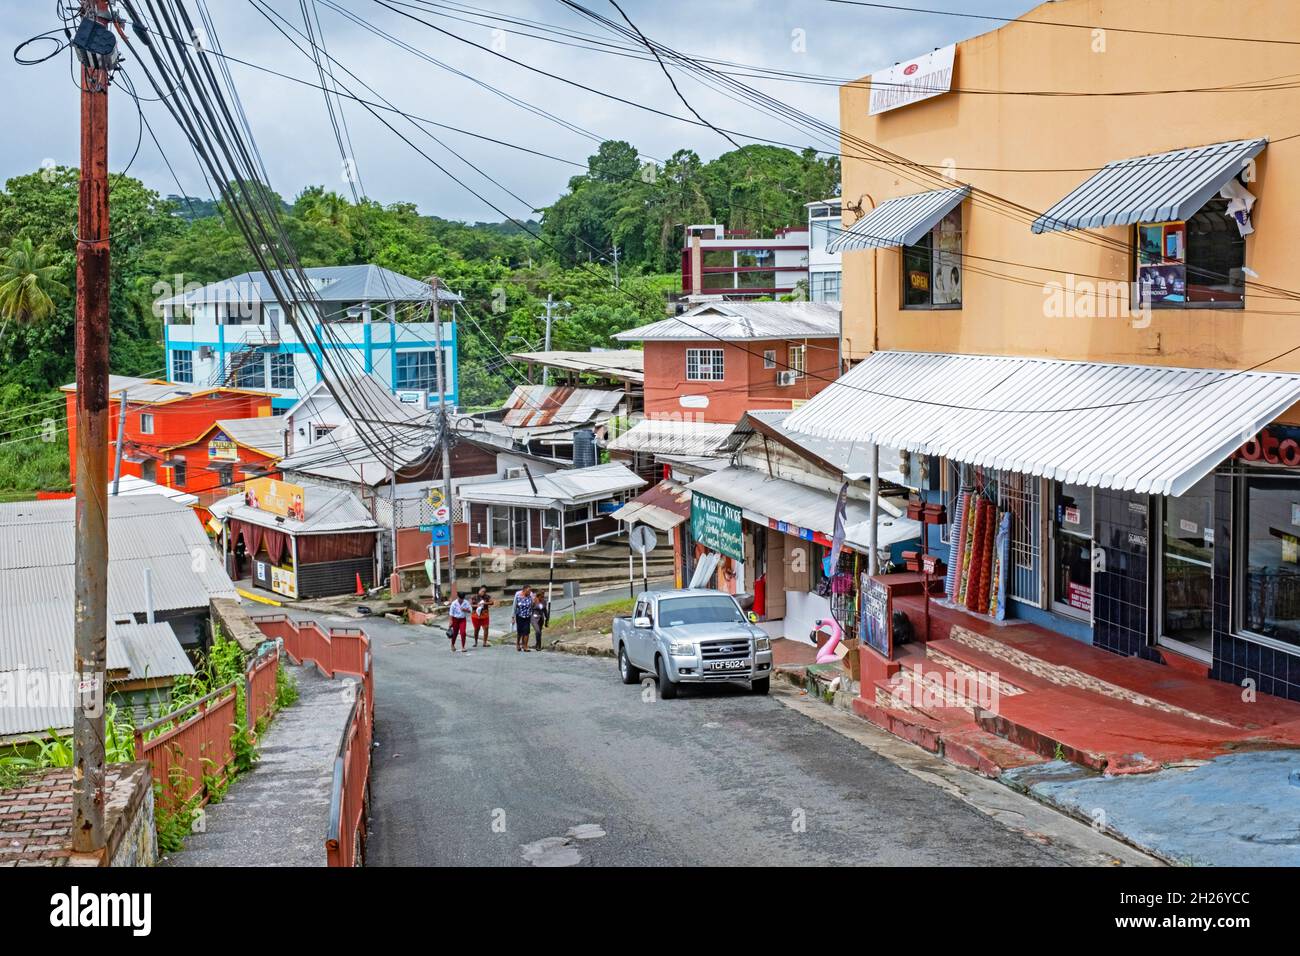 Streetscene showing shops at Scarborough, major city of the island Tobago, Trinidad and Tobago in the Caribbean Stock Photo